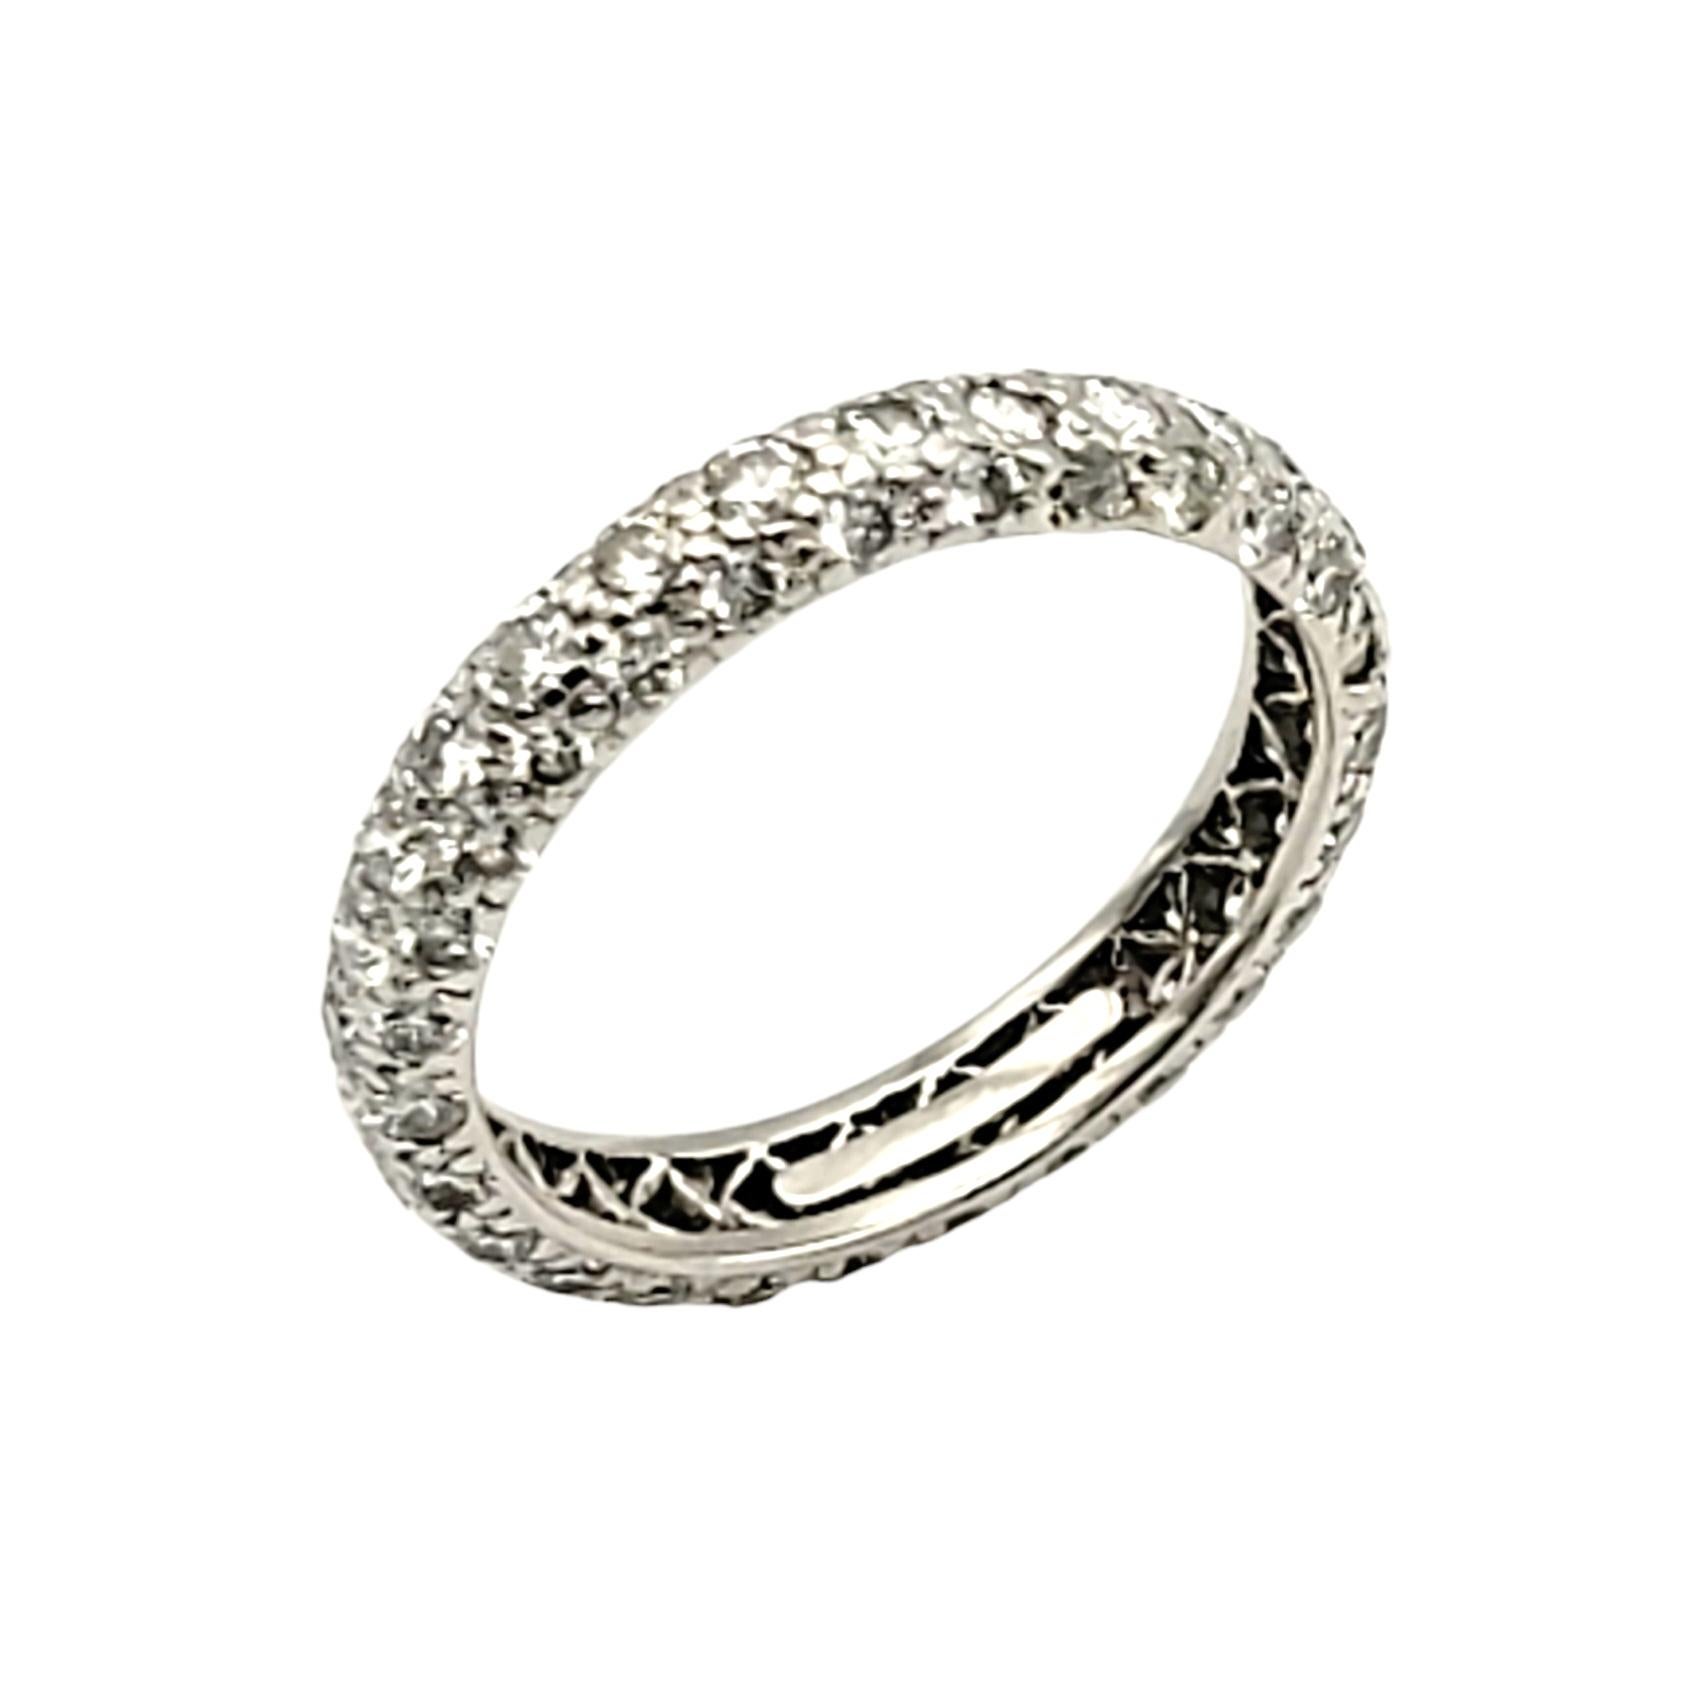 Ring size: 6

Modern and chic diamond eternity band ring from the Tiffany & Co. 'Etoile' collection. This gorgeous ring features 1.76 carats of bright, icy white pave diamonds set in multiple rows in a highly polished platinum setting. The platinum